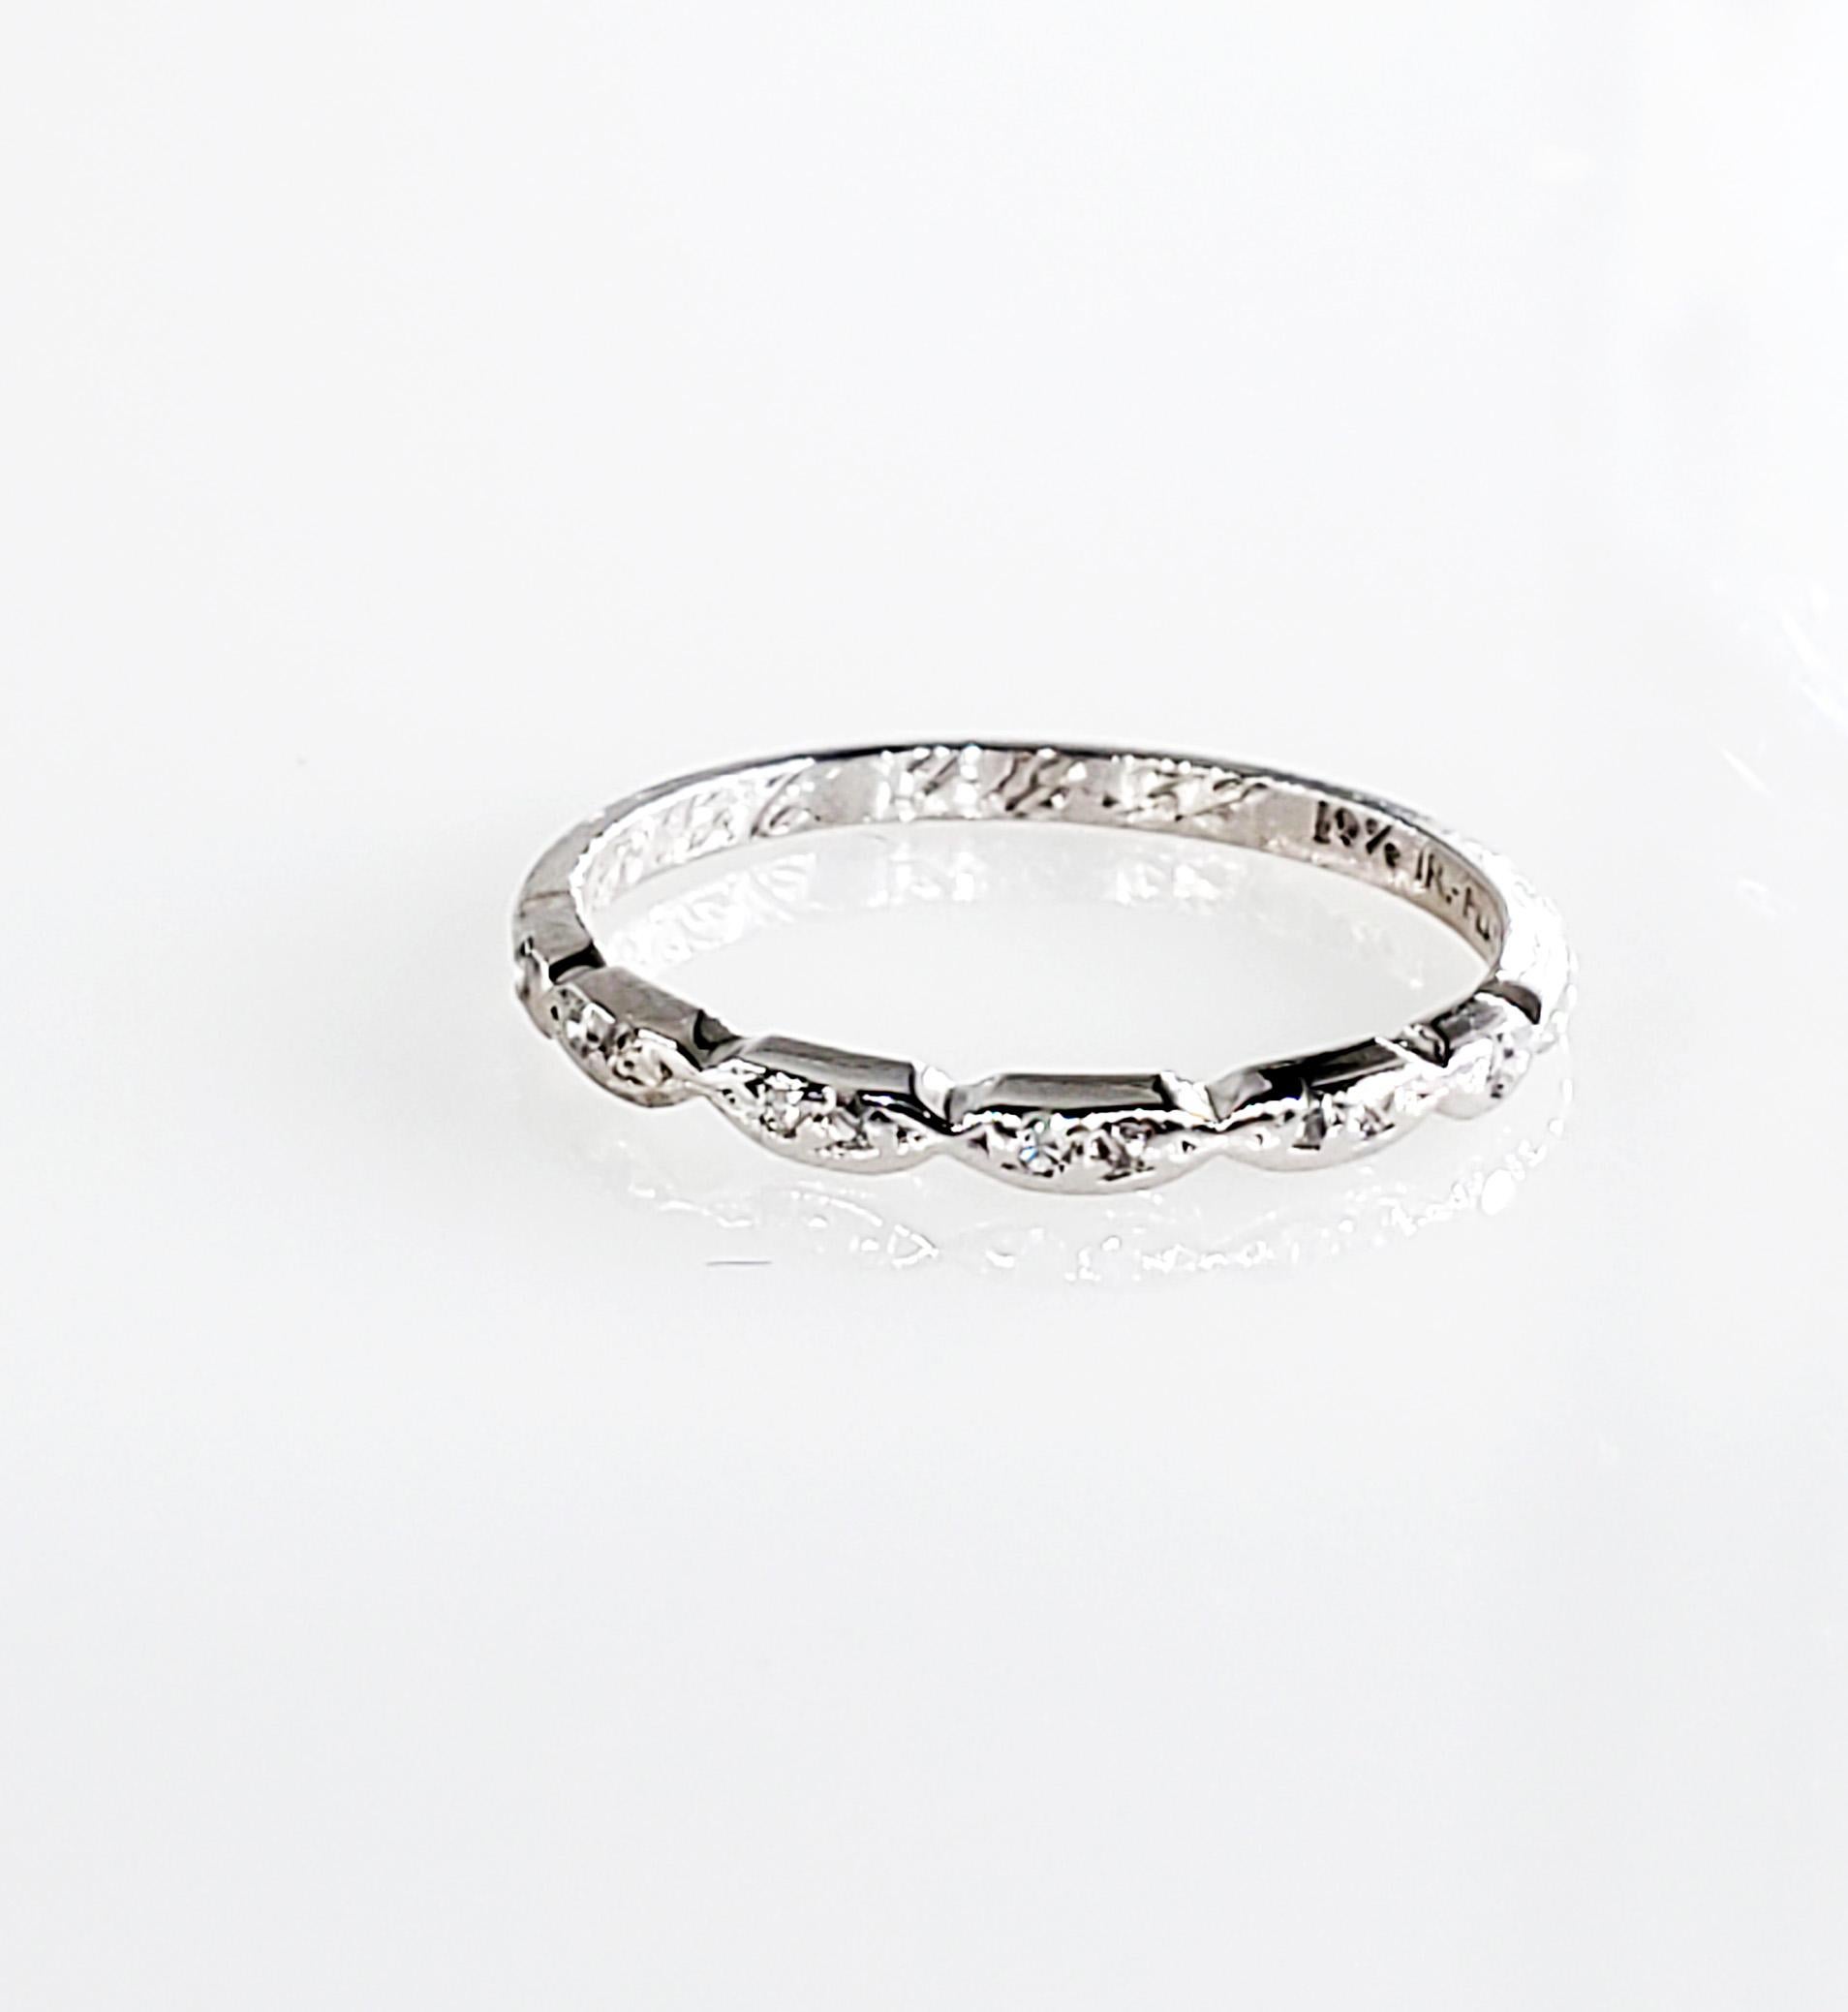 Antique sleekly Vintage Art Deco Diamond Wedding Band Platinum Ring
About as delicate as they come, dating from the Art Deco period, 1932, this slim diamond wedding band, hand-fabricated in platinum, ten tiny single-cut diamonds twinkle across the